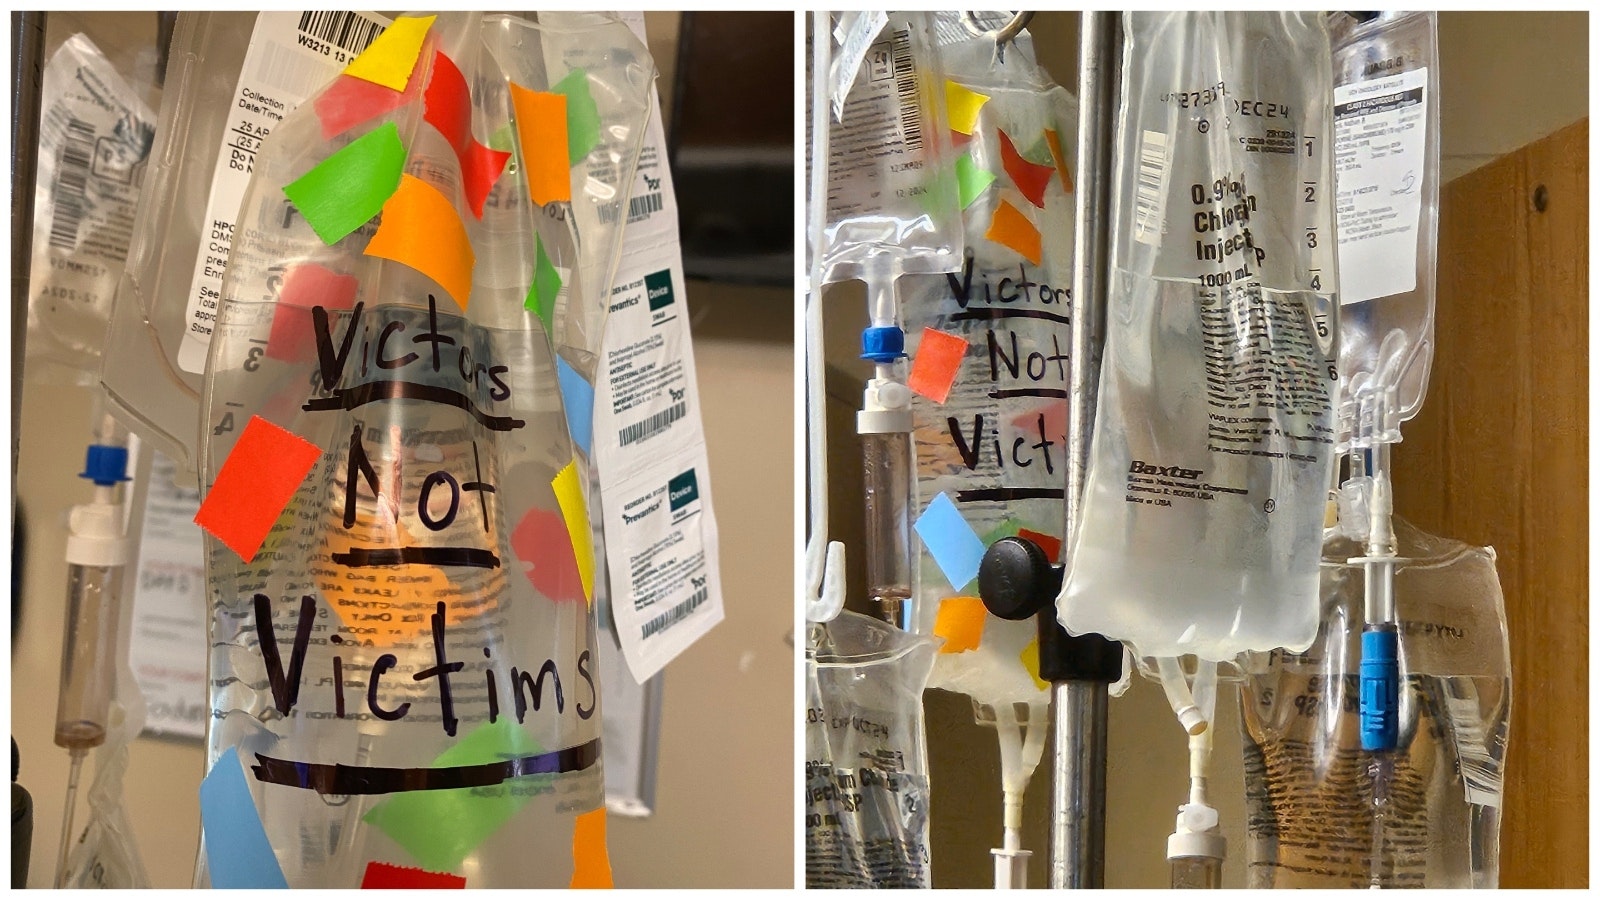 The IV bags from the latest battle with cancer. They started to write "Victors Not Victims" on the bags for him.